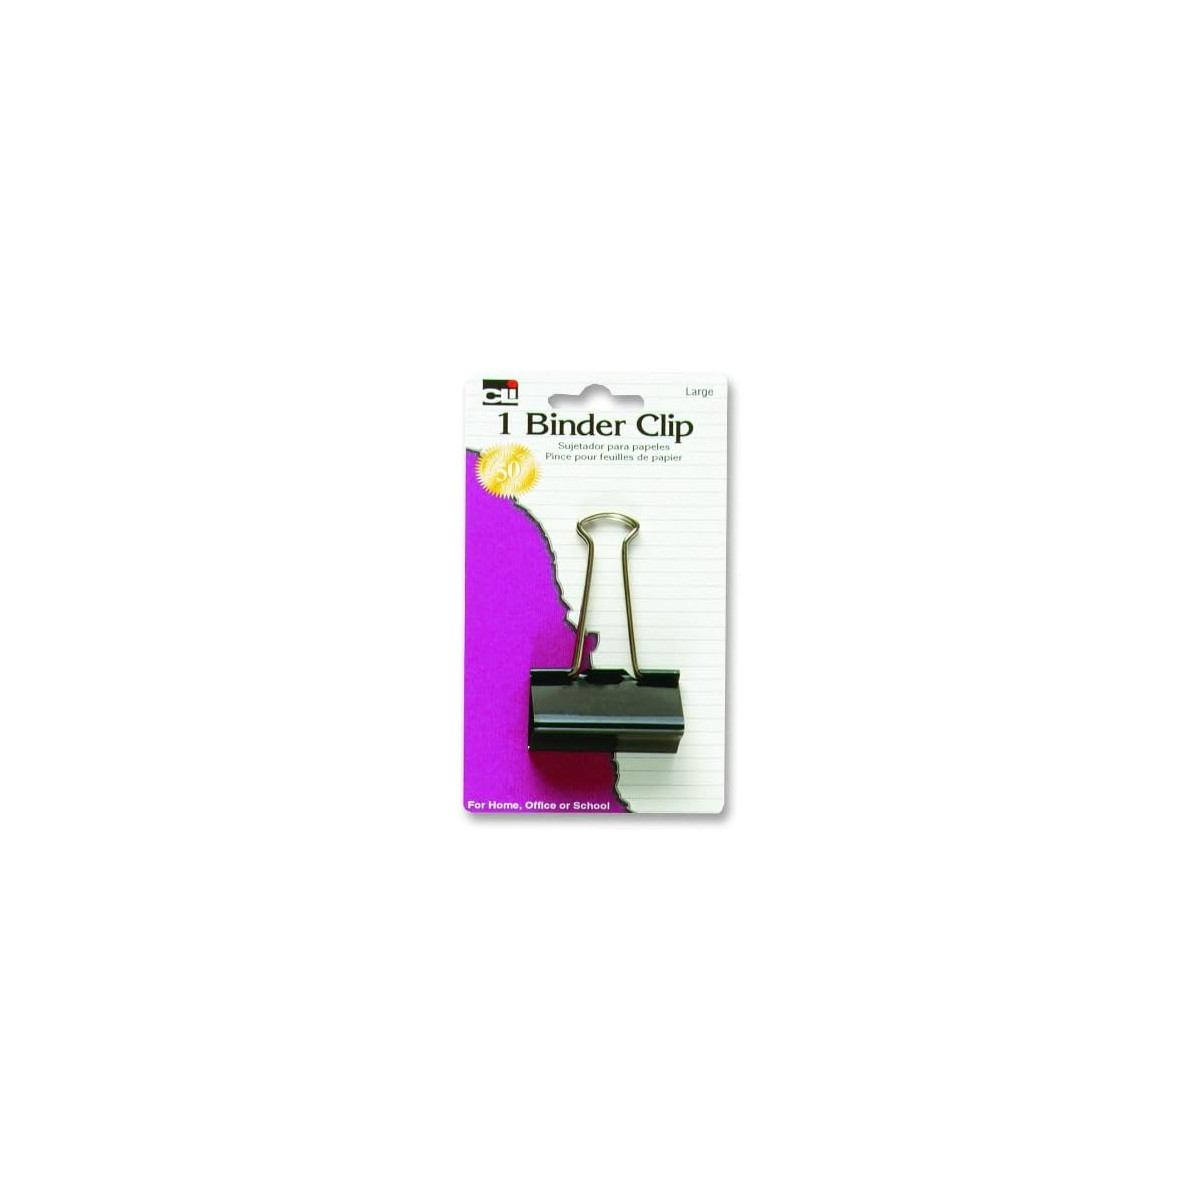 Binder Clips - Large - 2 wide, 1 capacity - 1/cd_